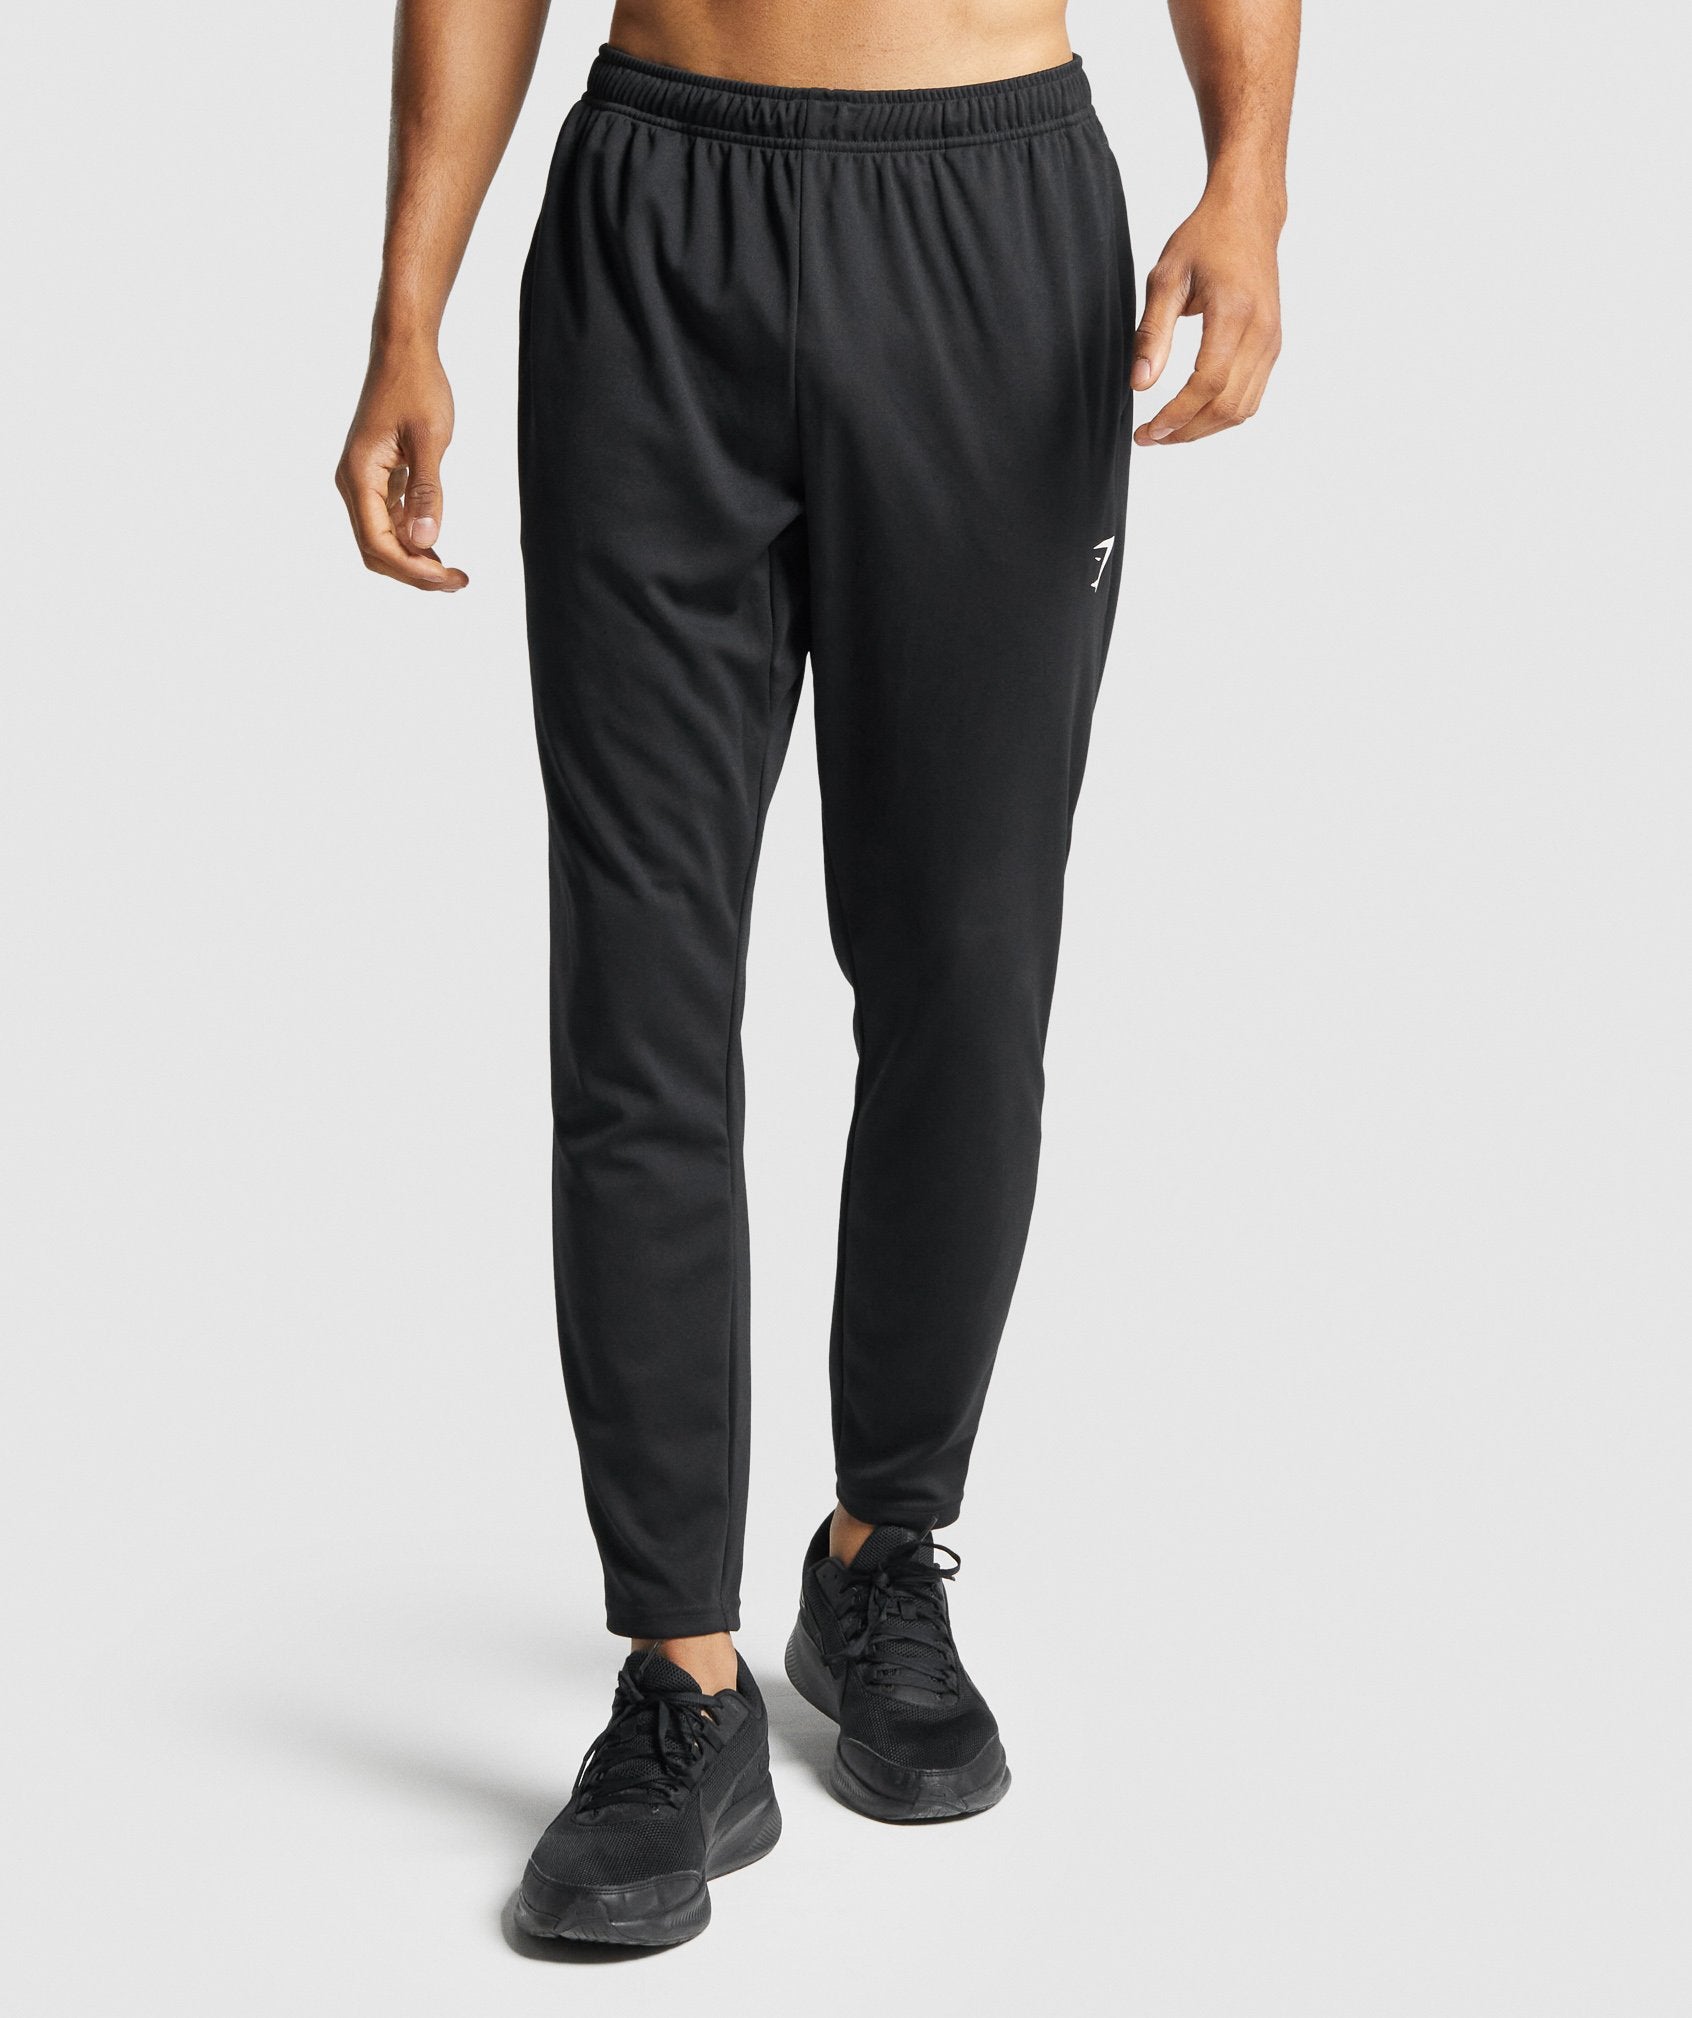 Arrival Knit Joggers in Black - view 1